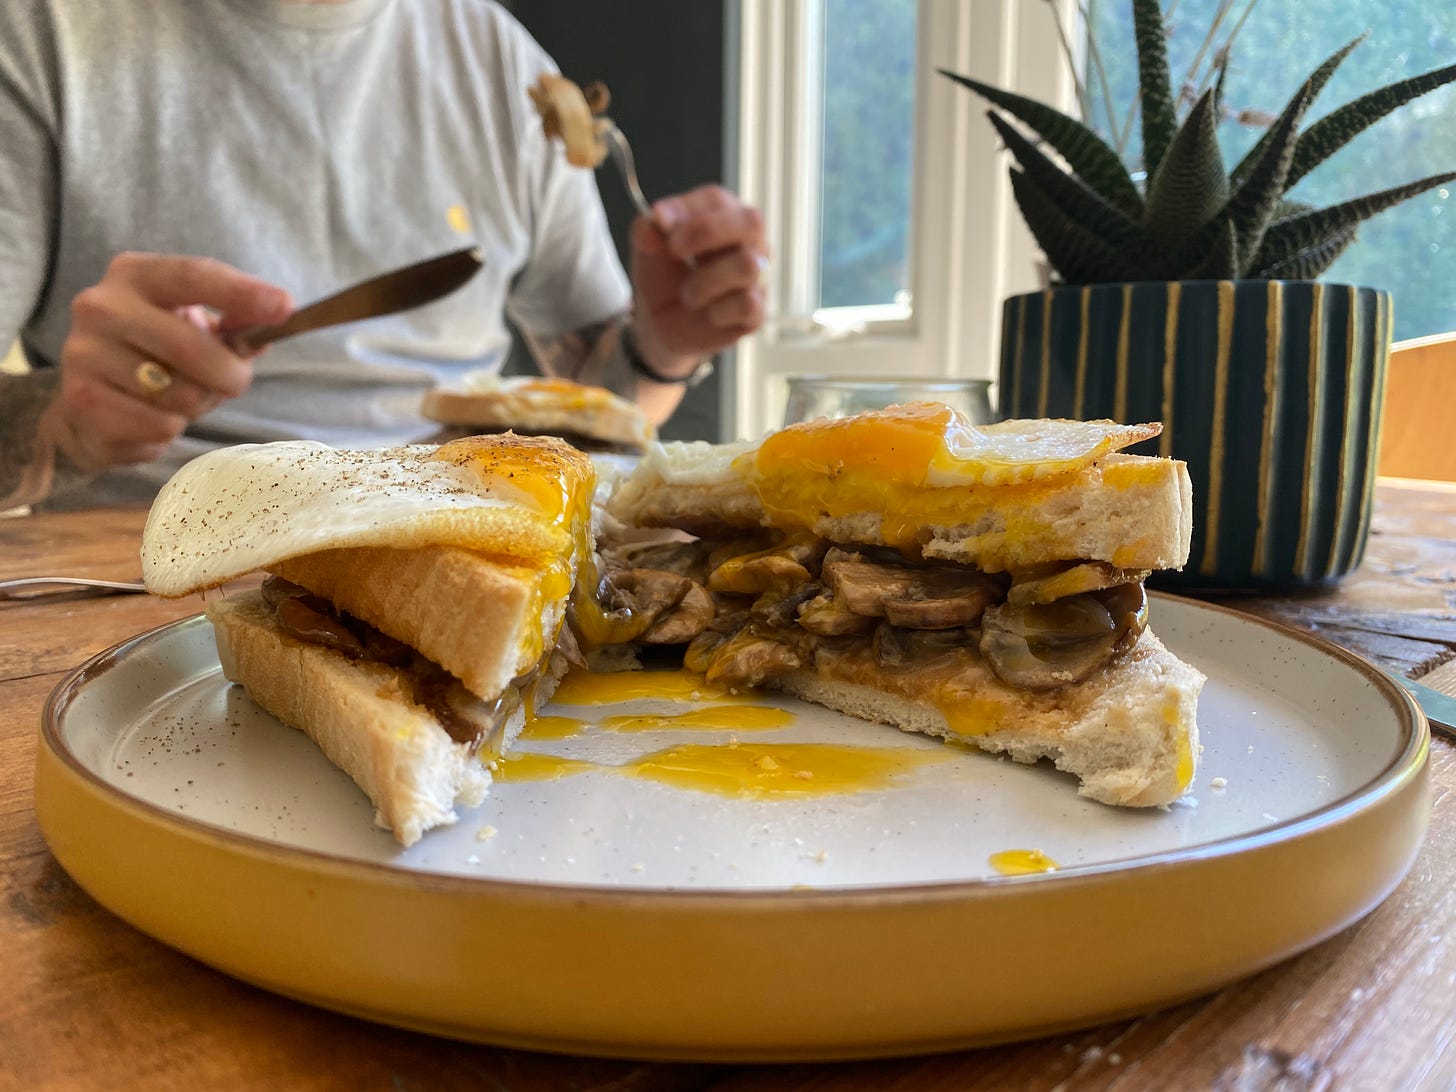 Plate on a table with a cut open sandwich filled with sliced mushrooms. A runny yolk egg is on top, and yellow yolk is splodged over the plate. A person is in the background holding a knife and fork poised to eat.